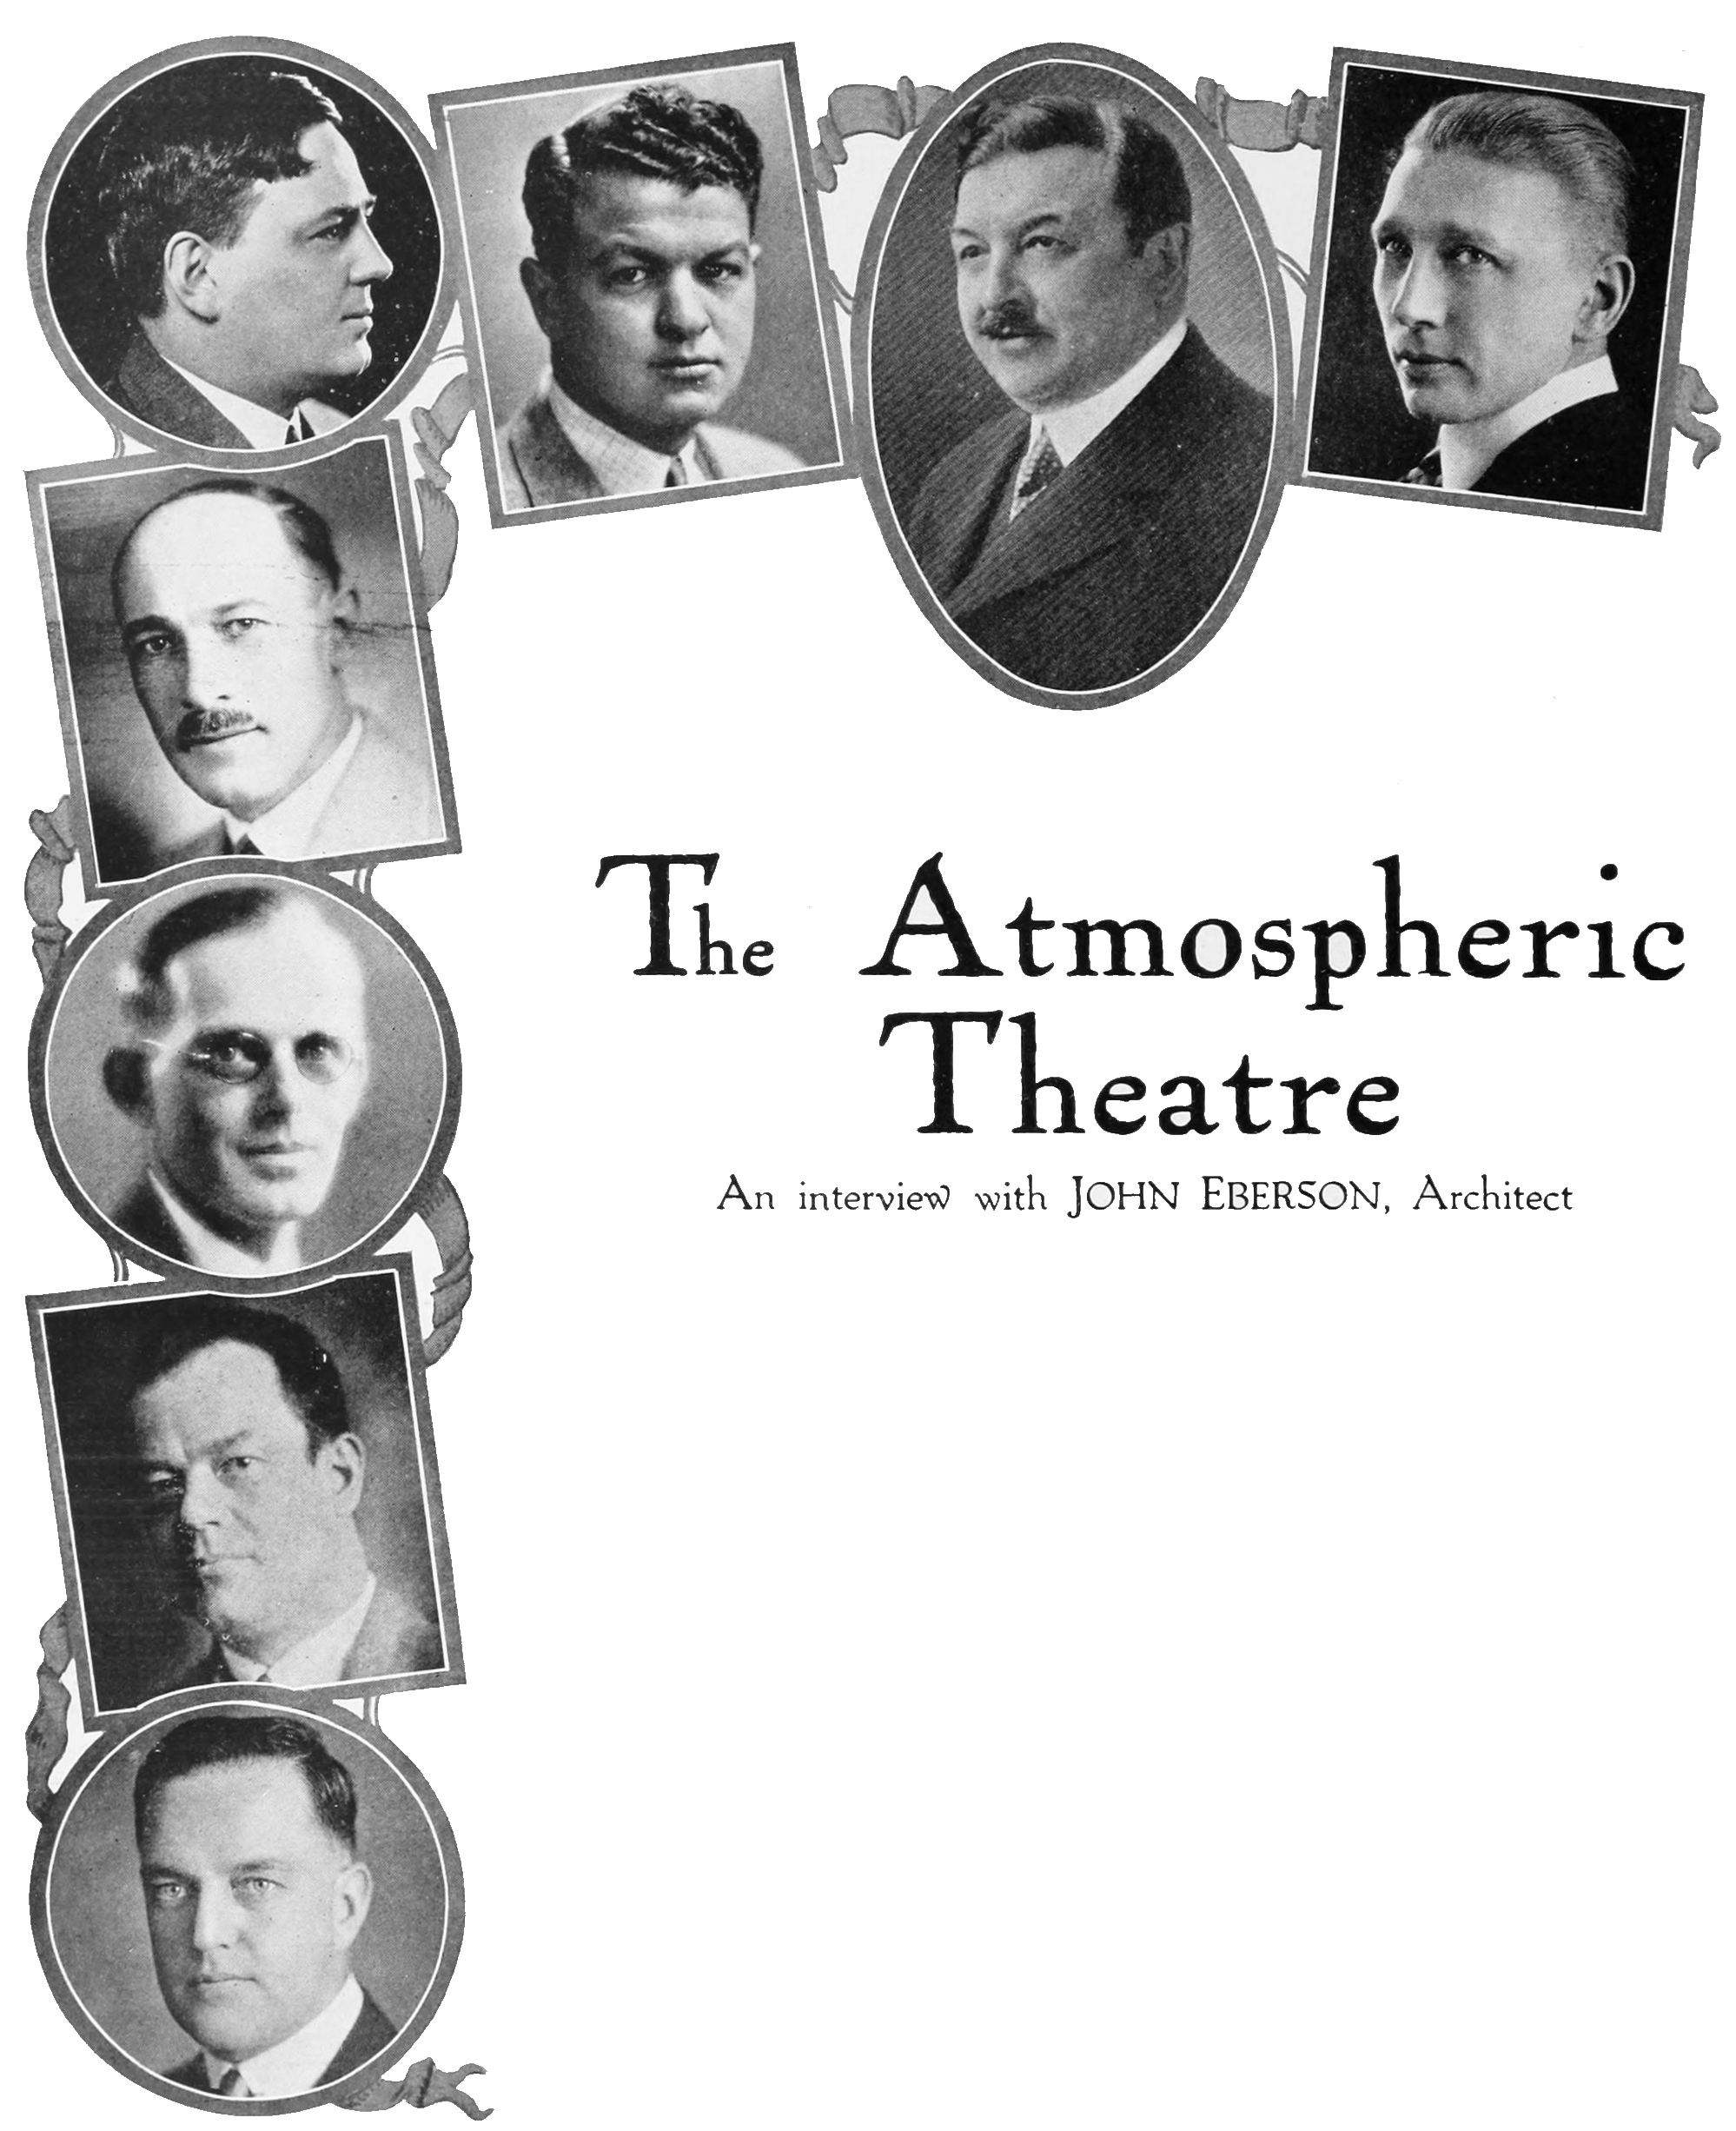 The Atmospheric Theatre, by John Eberson